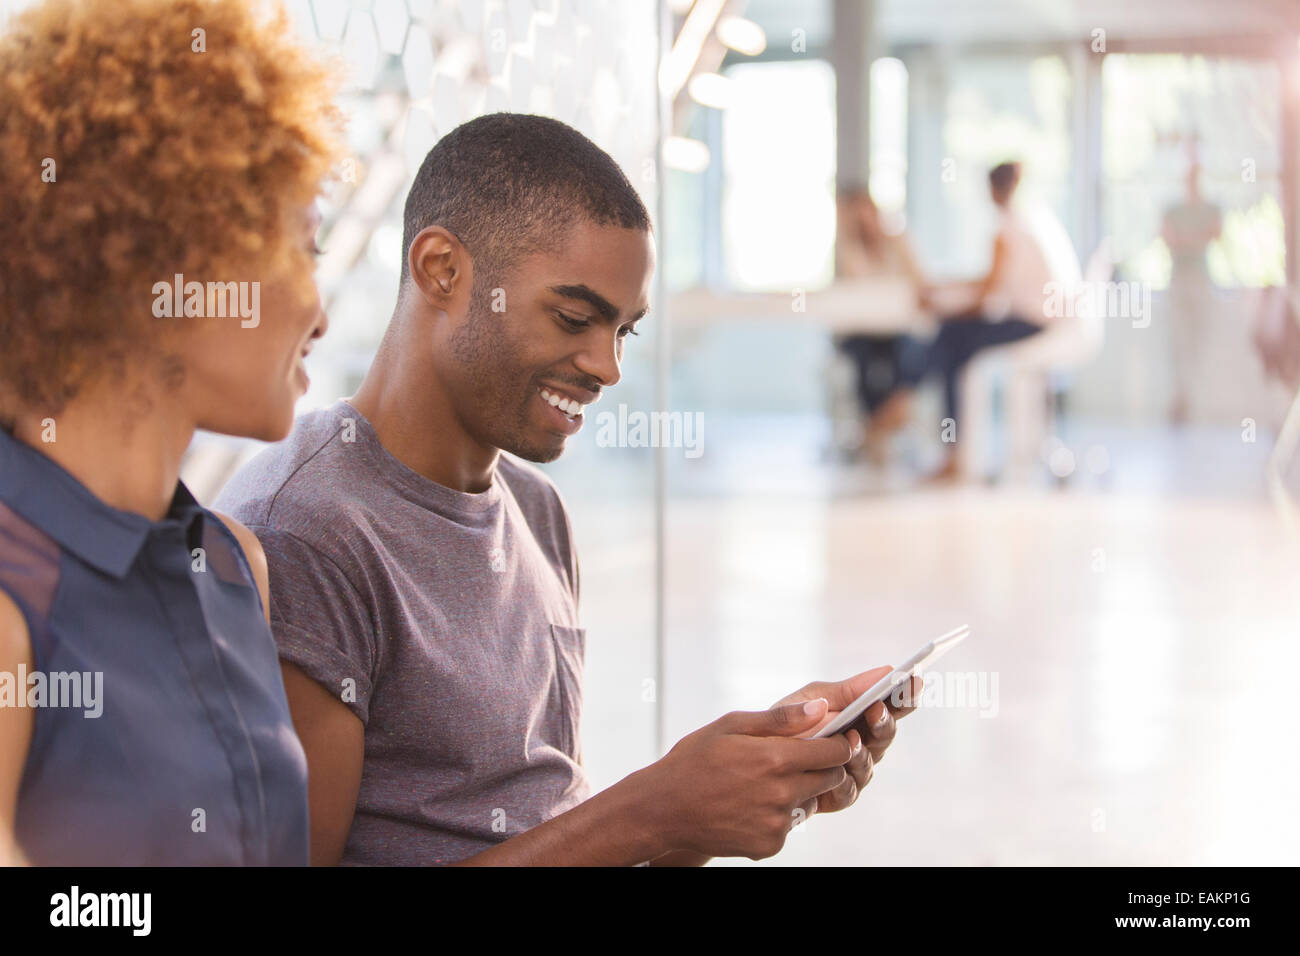 Man and woman using digital tablet in office, colleagues in background Stock Photo